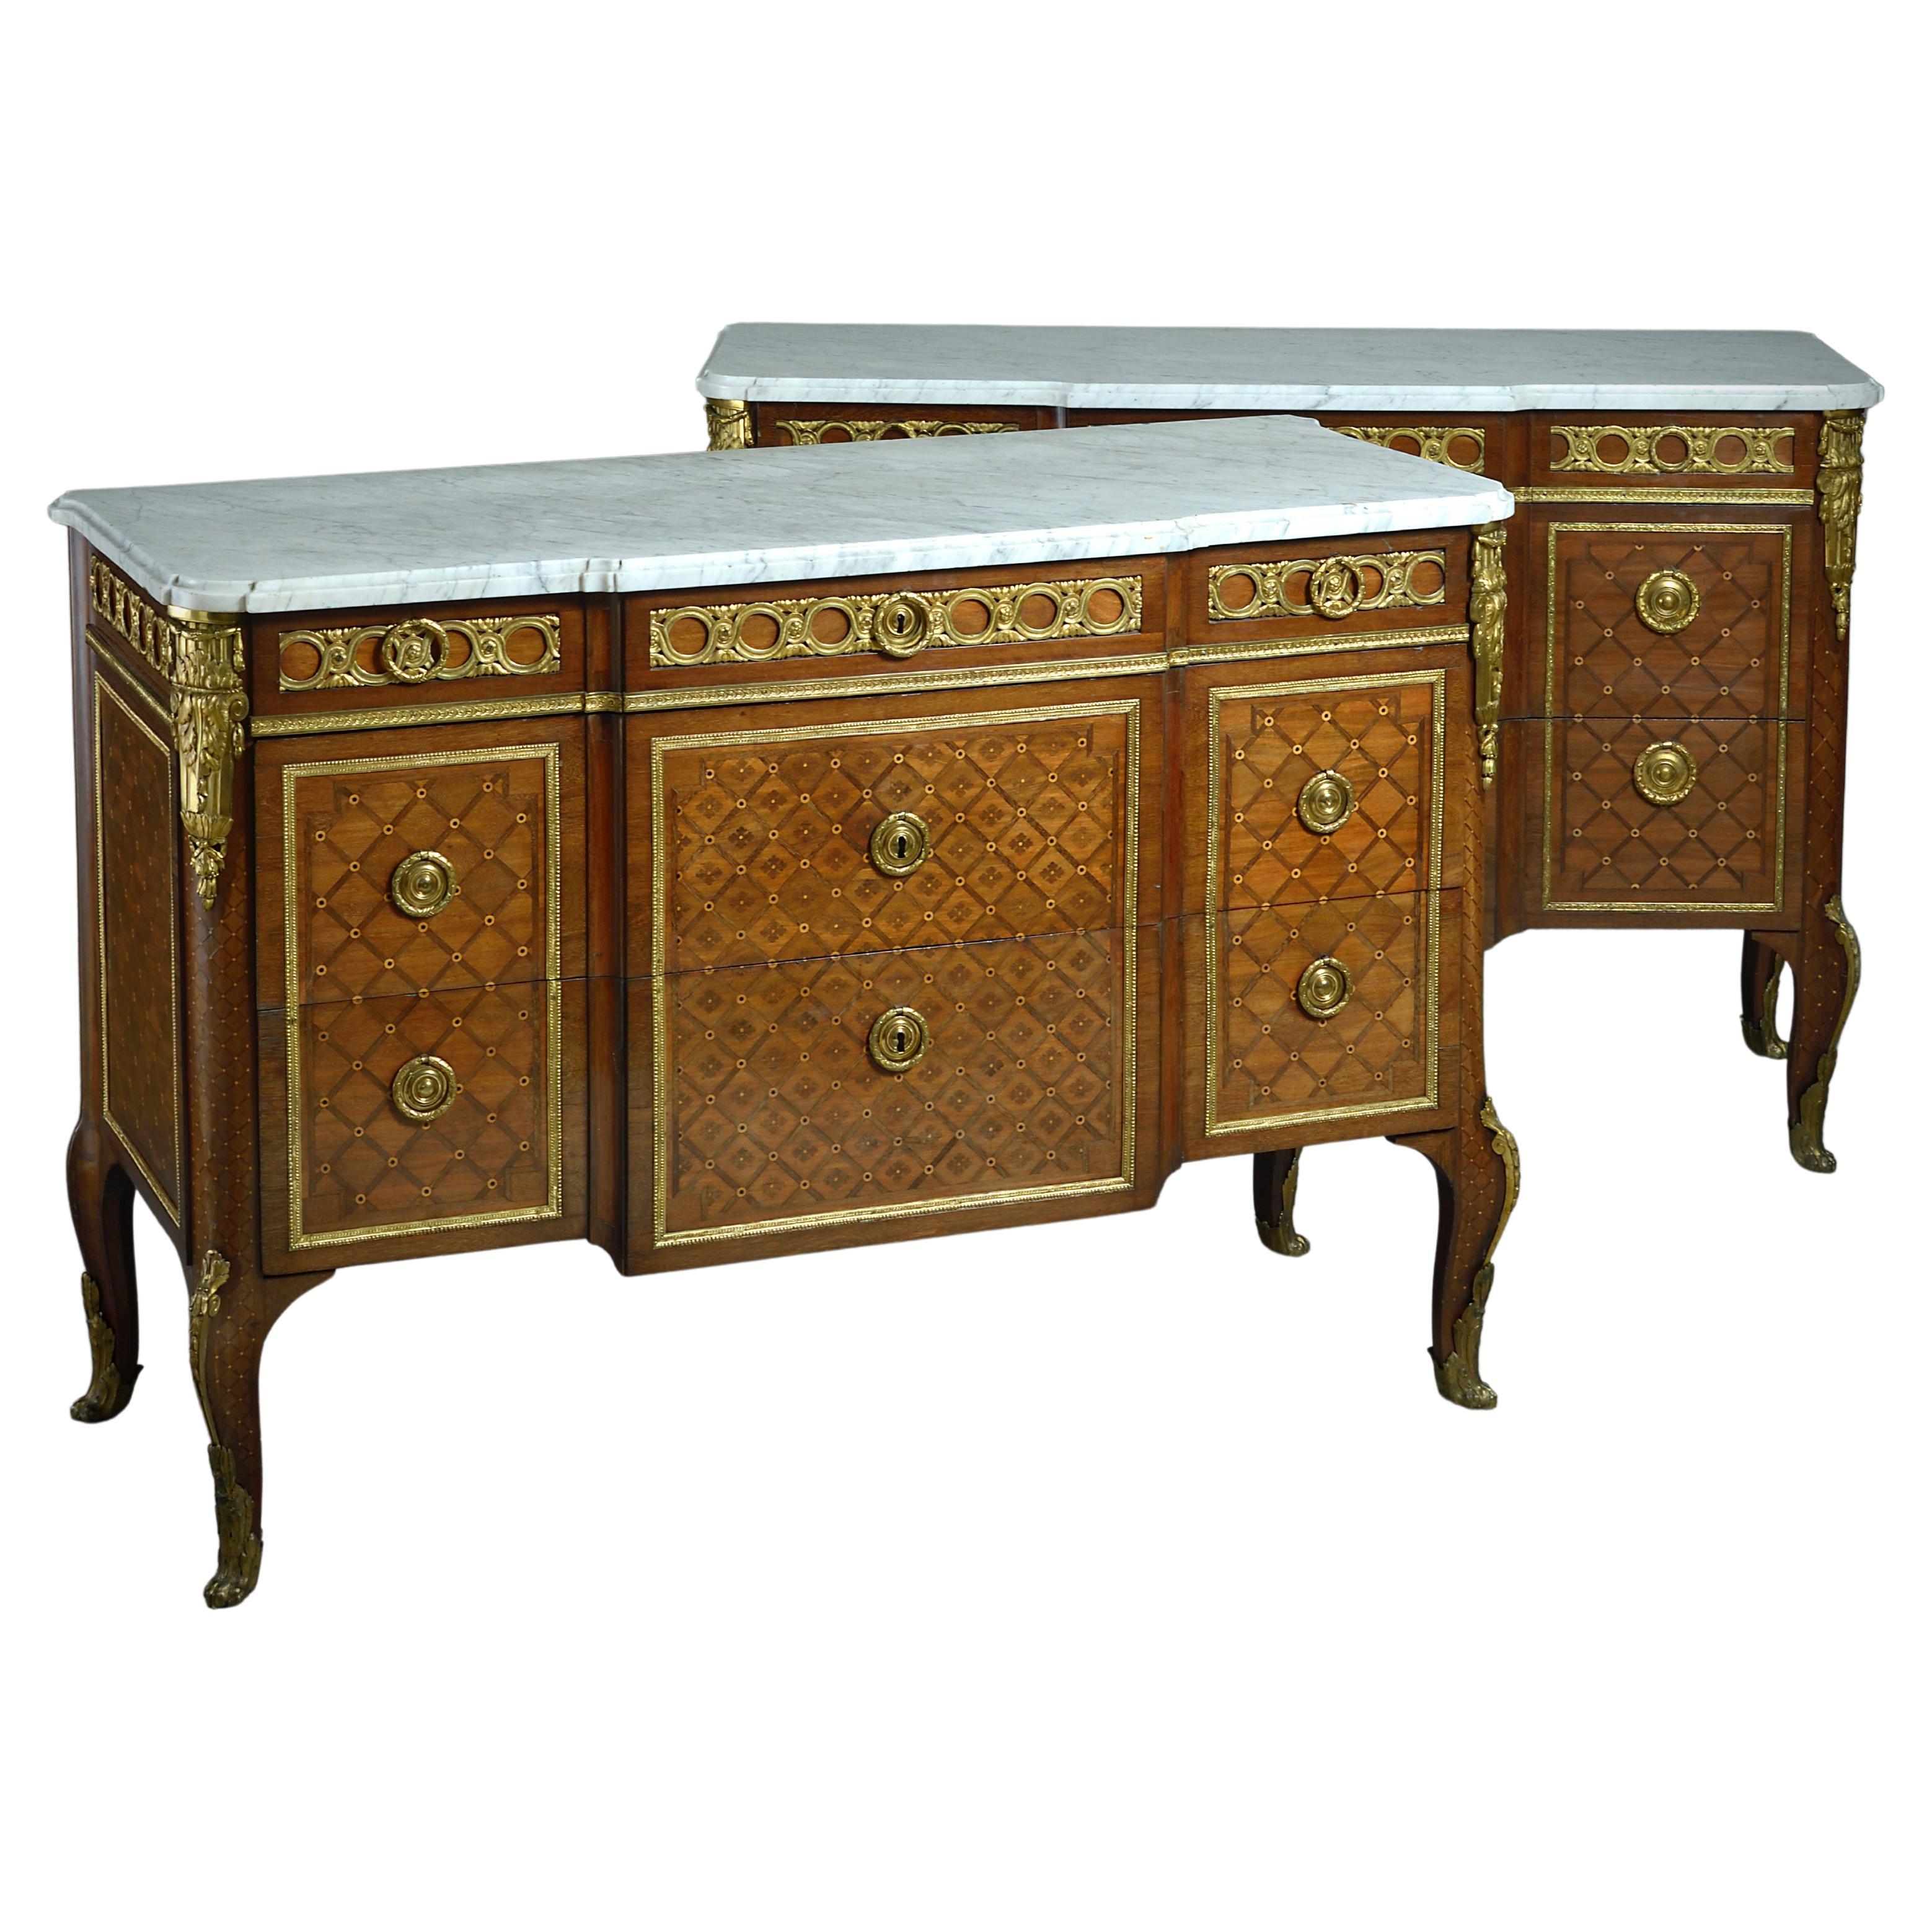 The Longleat Commodes For Sale